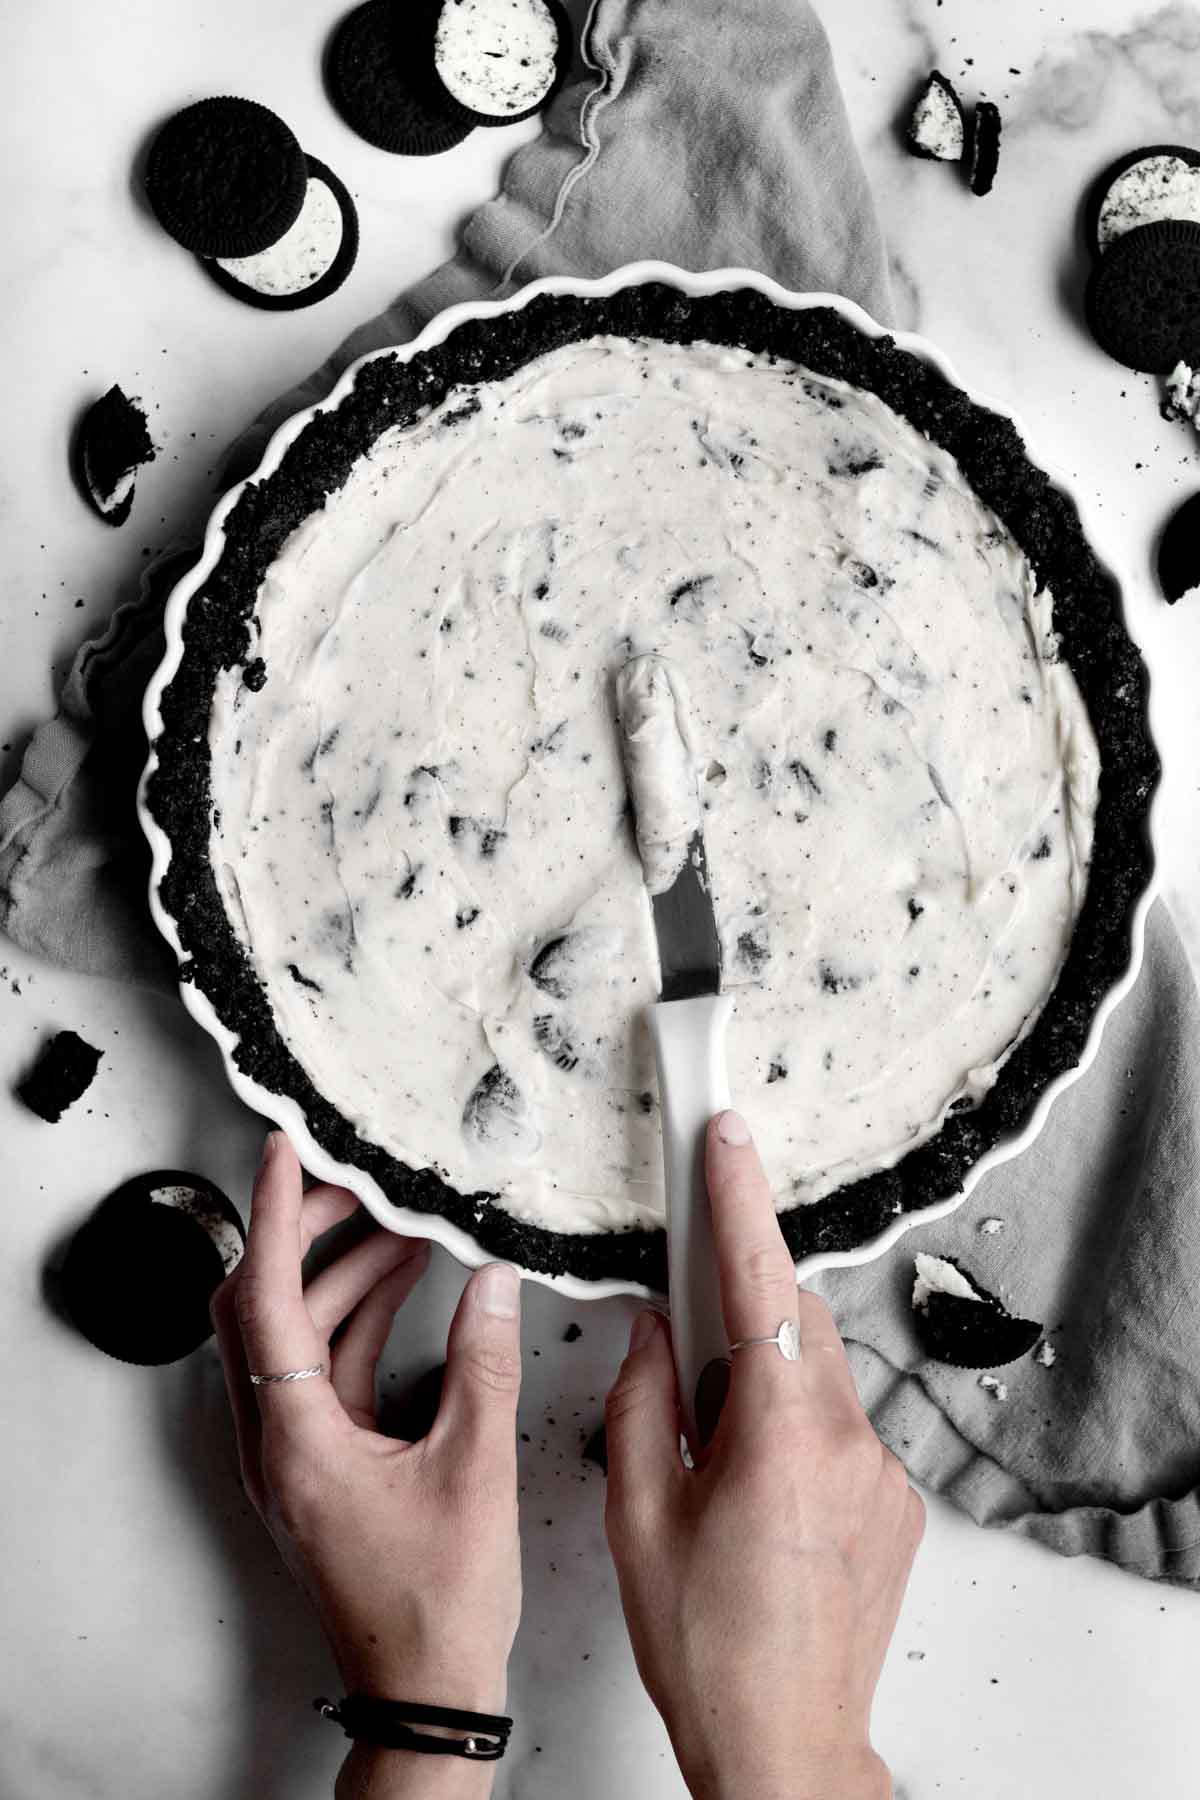 Smoothing out the Cookies and Cream filling on top of the crust.